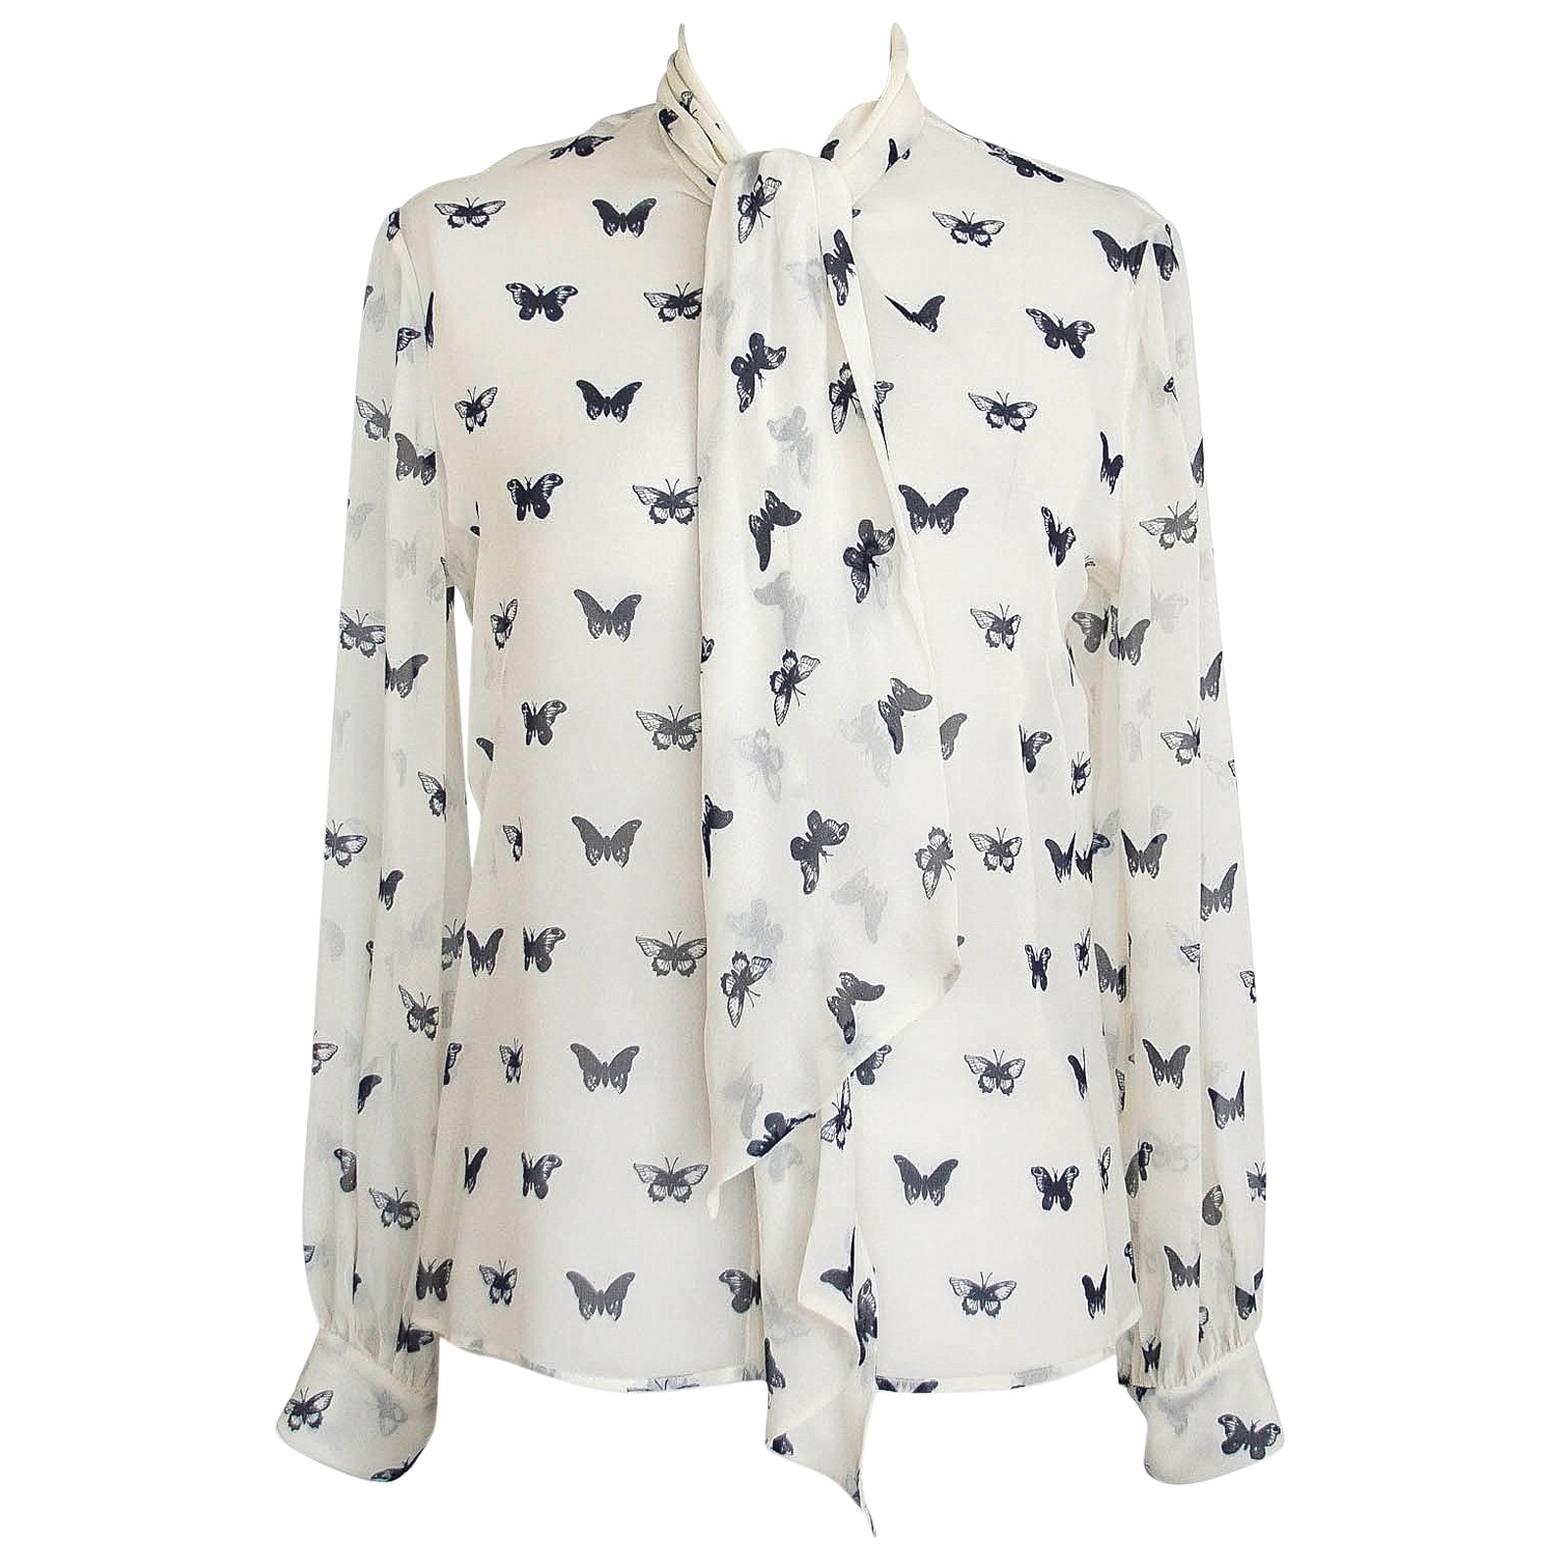 Guaranteed authentic Alexander McQueen lovely silk self tie blouse.
Charming semi sheer navy butterfly print on soft winter white blouse.
Hidden 8 button placket and 2 buttons at each cuff.
final sale

SIZE 44
USA SIZE 8

TOP MEASURES: 
LENGTH 